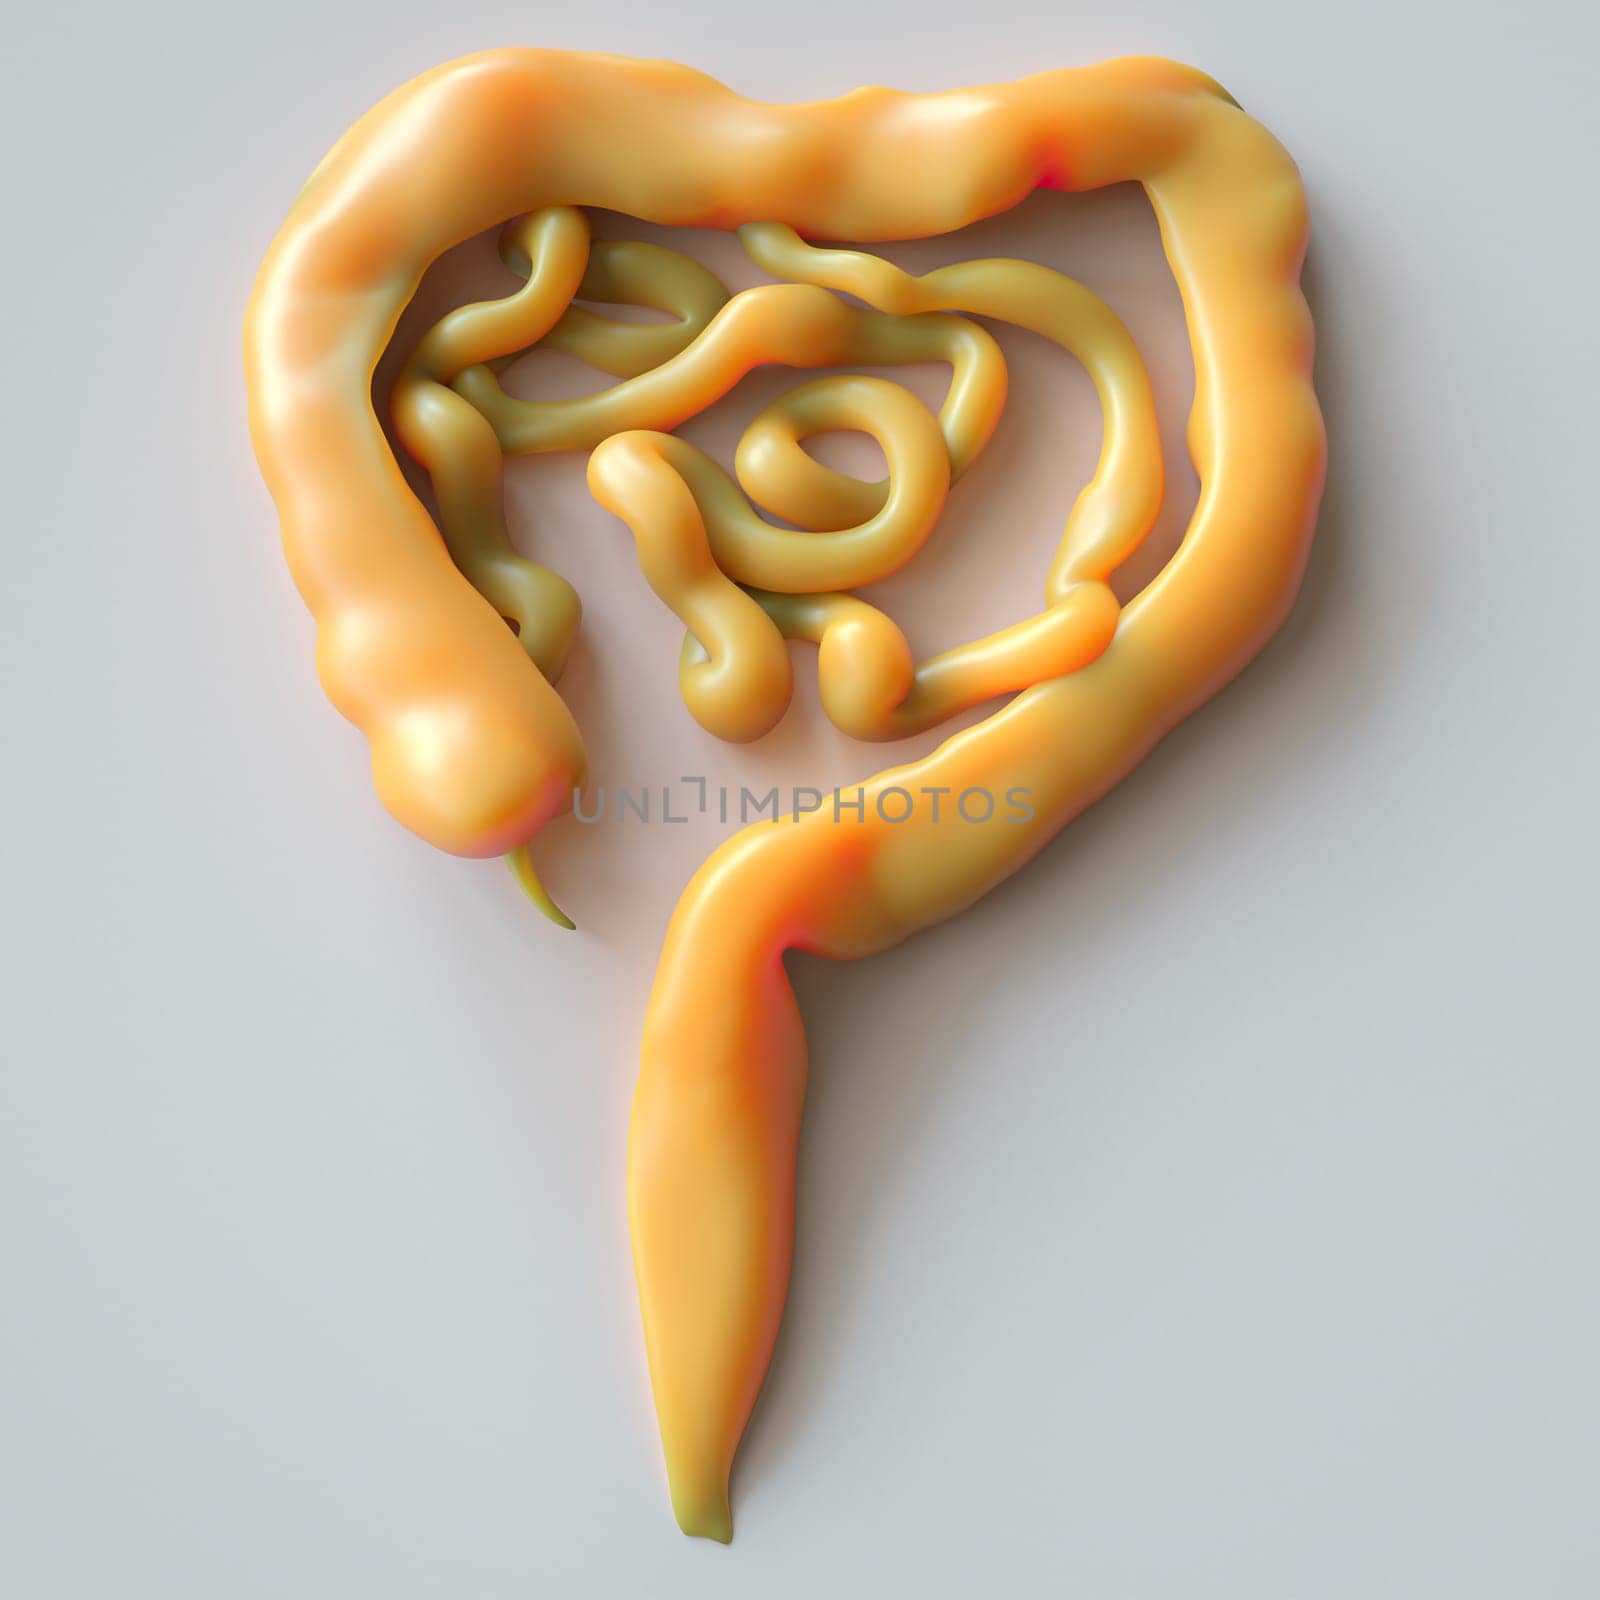 Abstract Intestinal Model with Rubber-Like Textures and Inflammation Indicators - 3D Rendering by Crevis